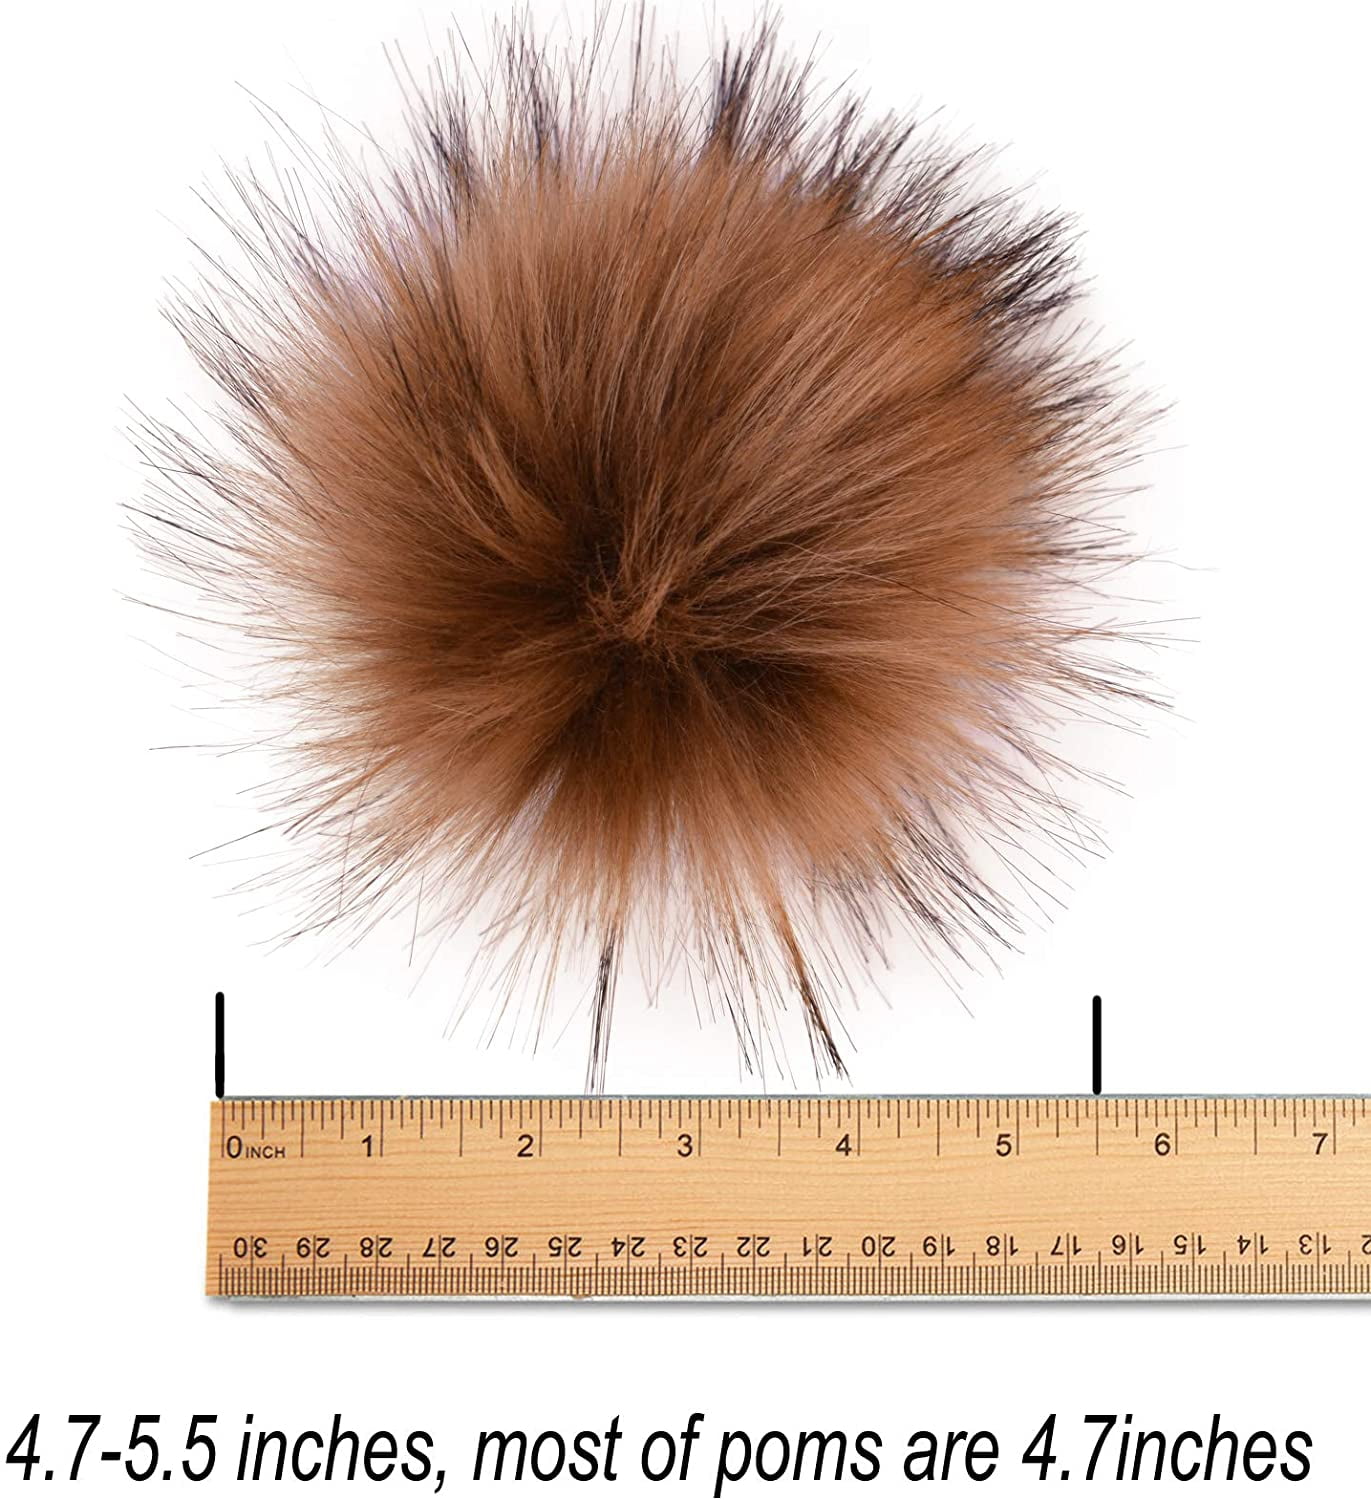 Detachable Pompom Fur Balls with Elastic Loop Great for Handmade Hats Beanies 12pcs Faux Fox Fur Pom Poms for Hats Scarves 4.7 inches Fluffy Faux Fur Pom Pom Balls for Hats Bag DIY shoes 